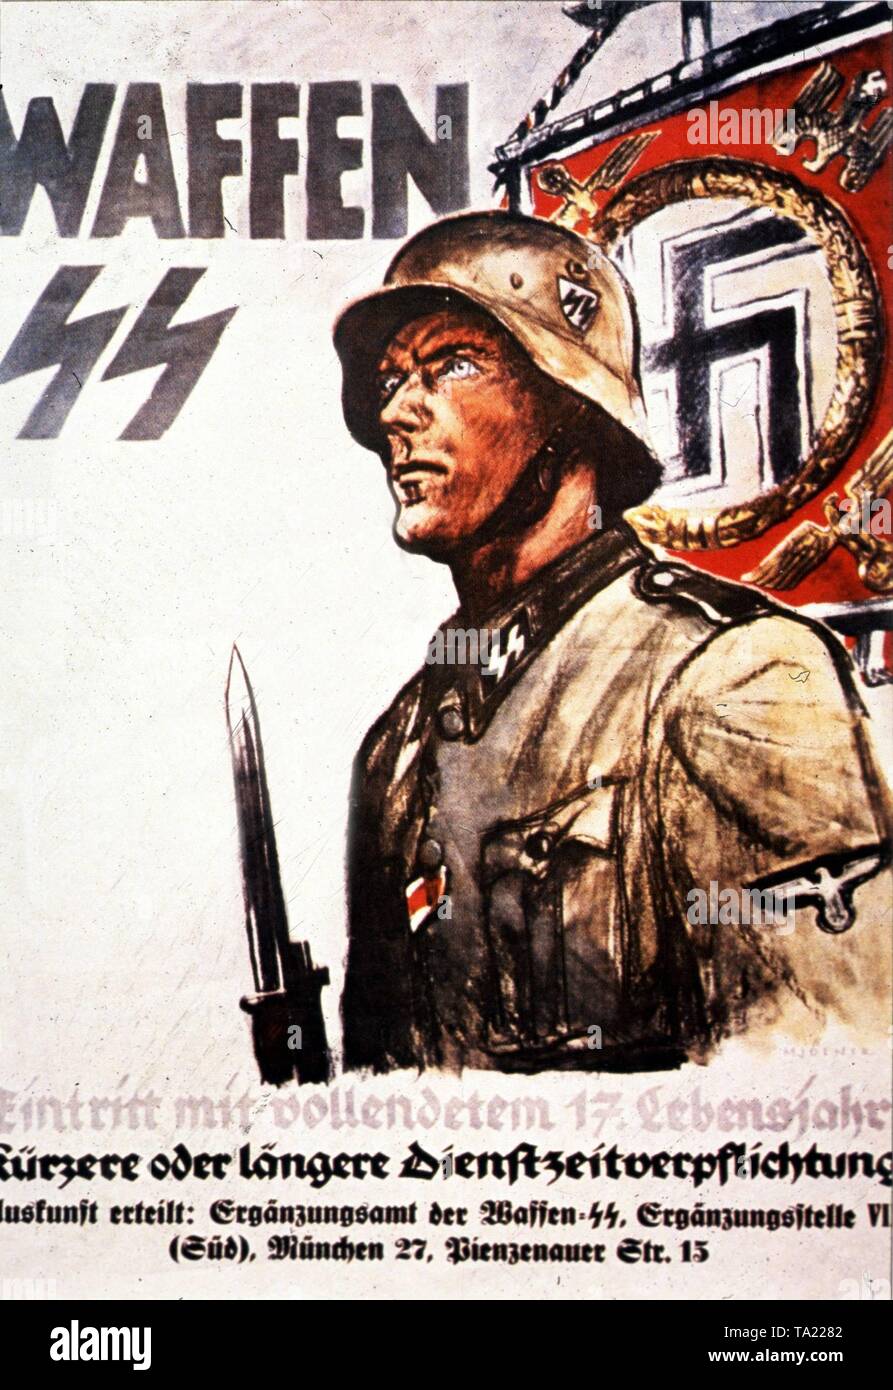 Waffen ss poster hi-res photography images -